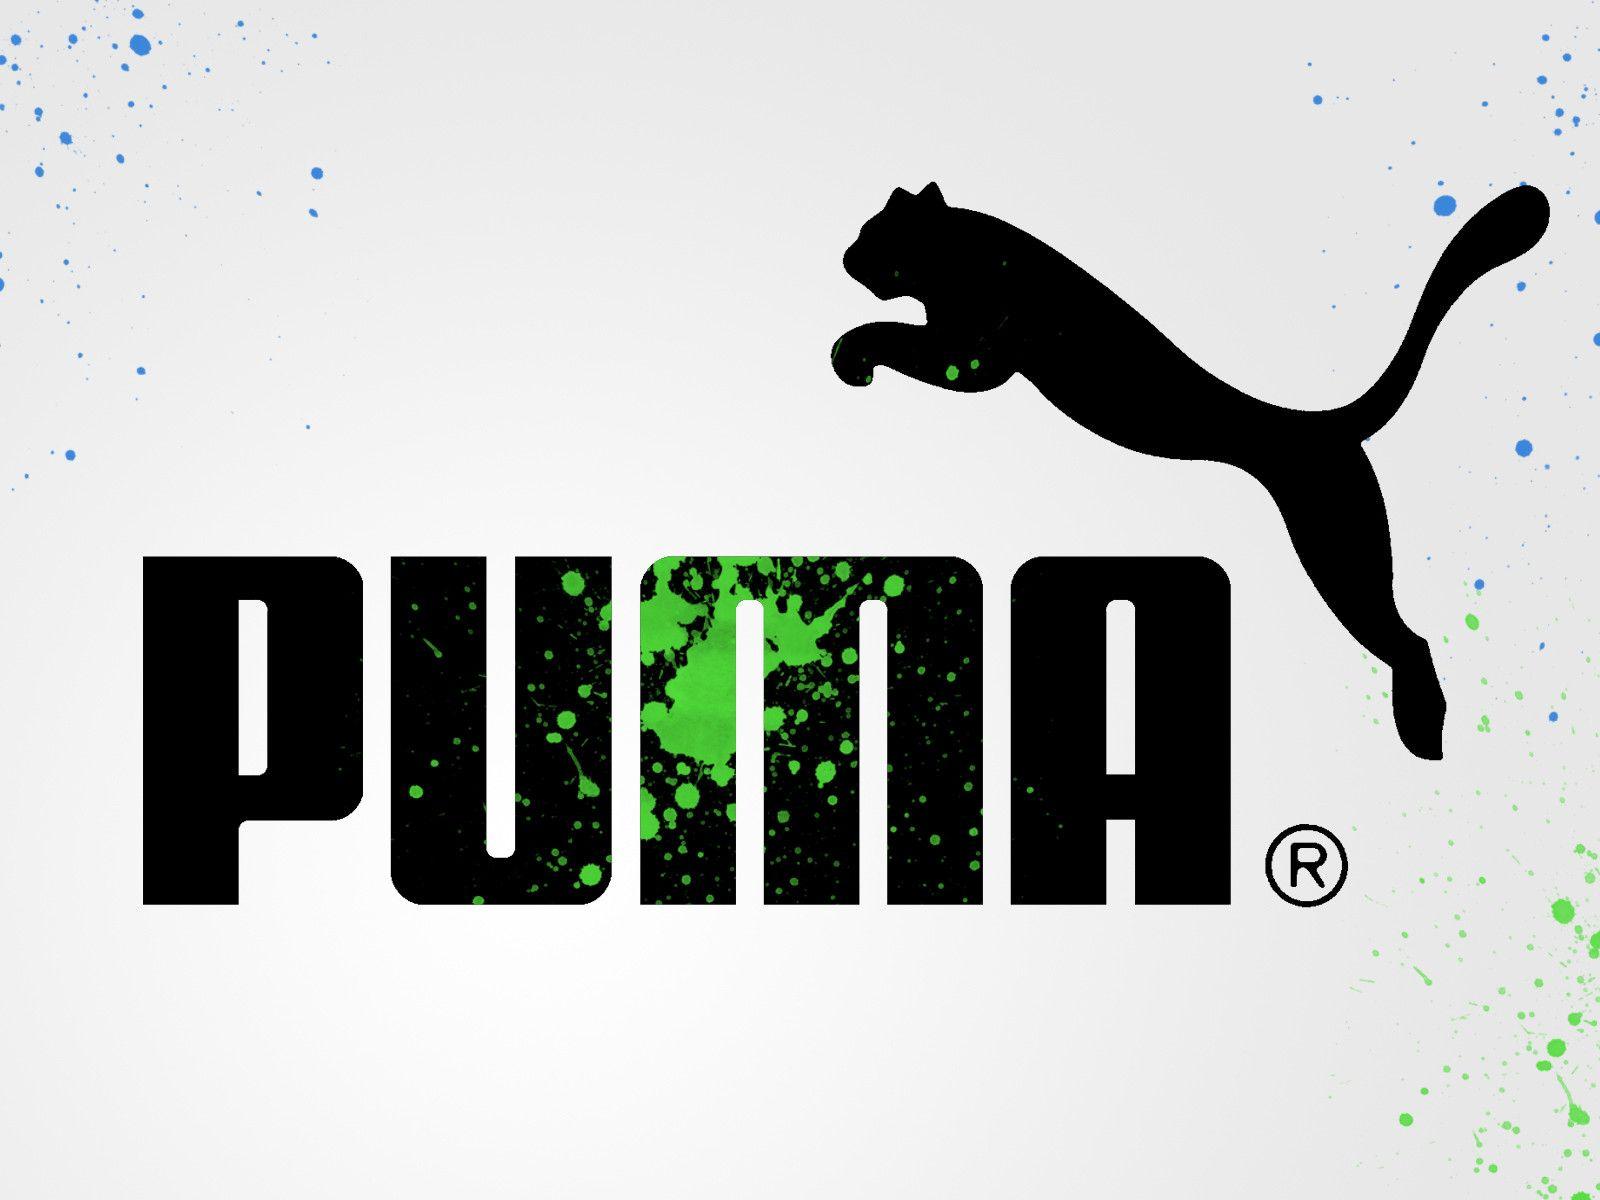 Free Awesome Puma Logo Wallpapers & HD pictures